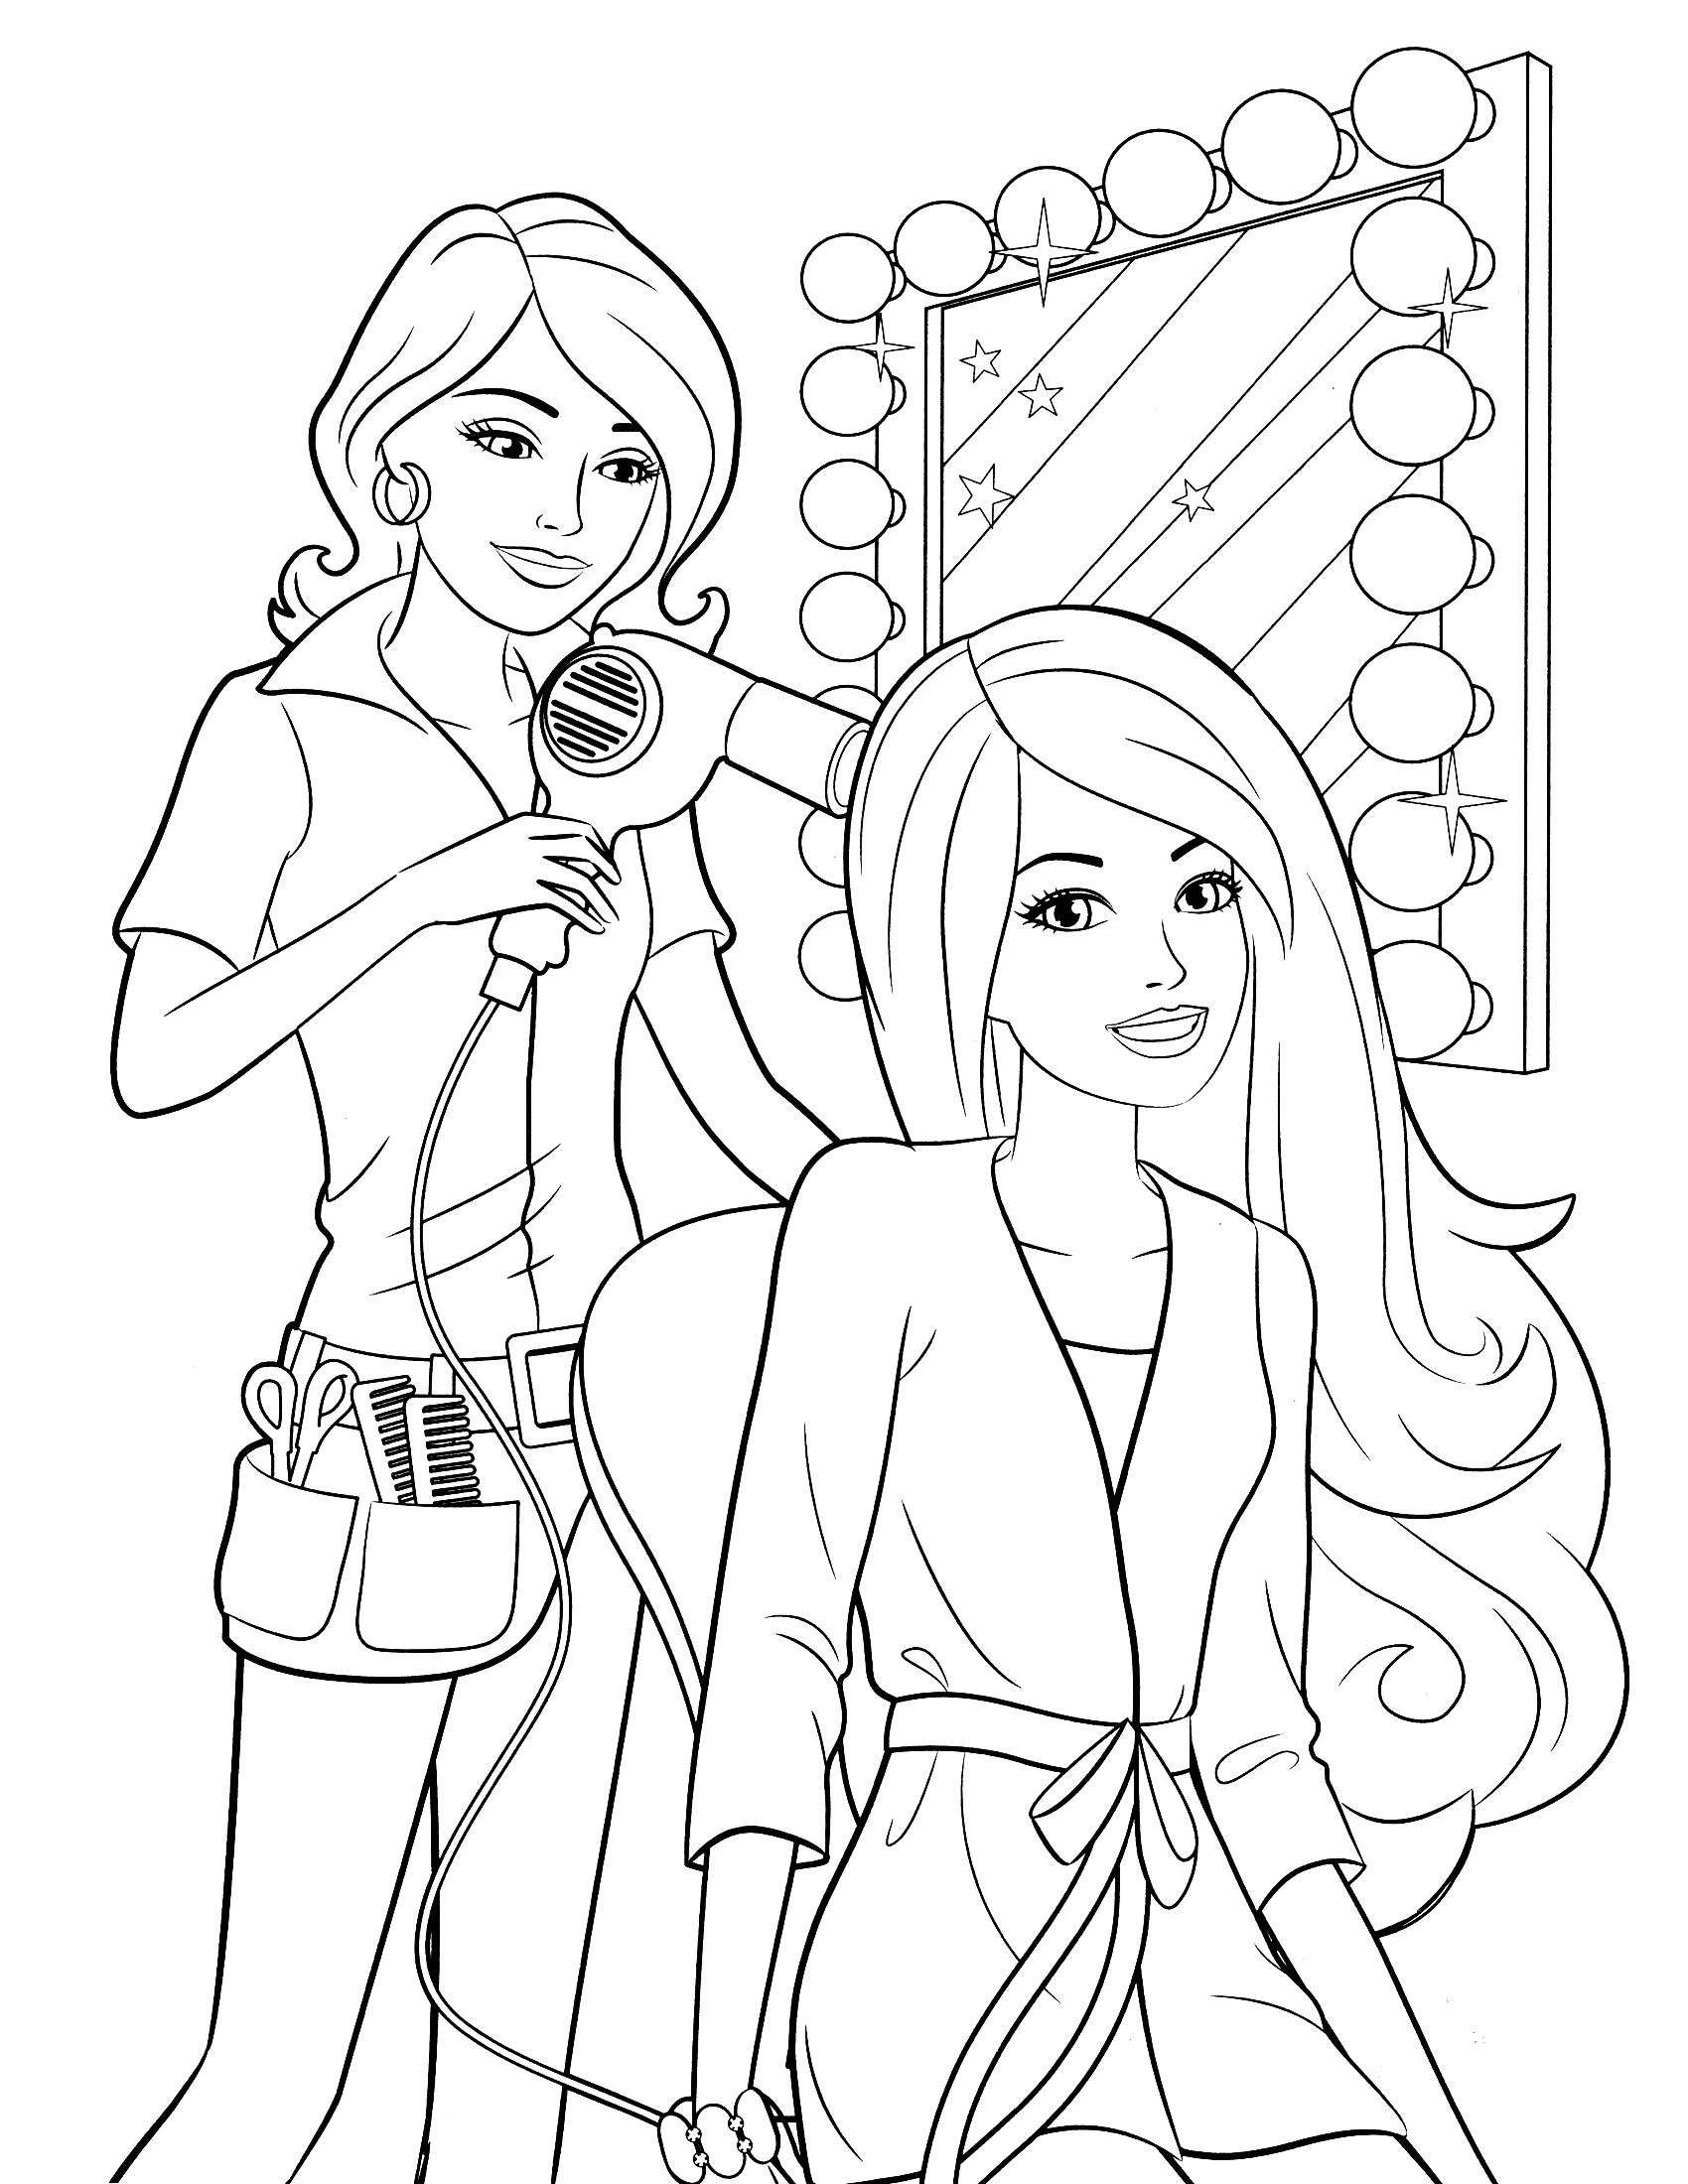 Coloring Book Games For Girls
 Coloring Pages for Girls Best Coloring Pages For Kids